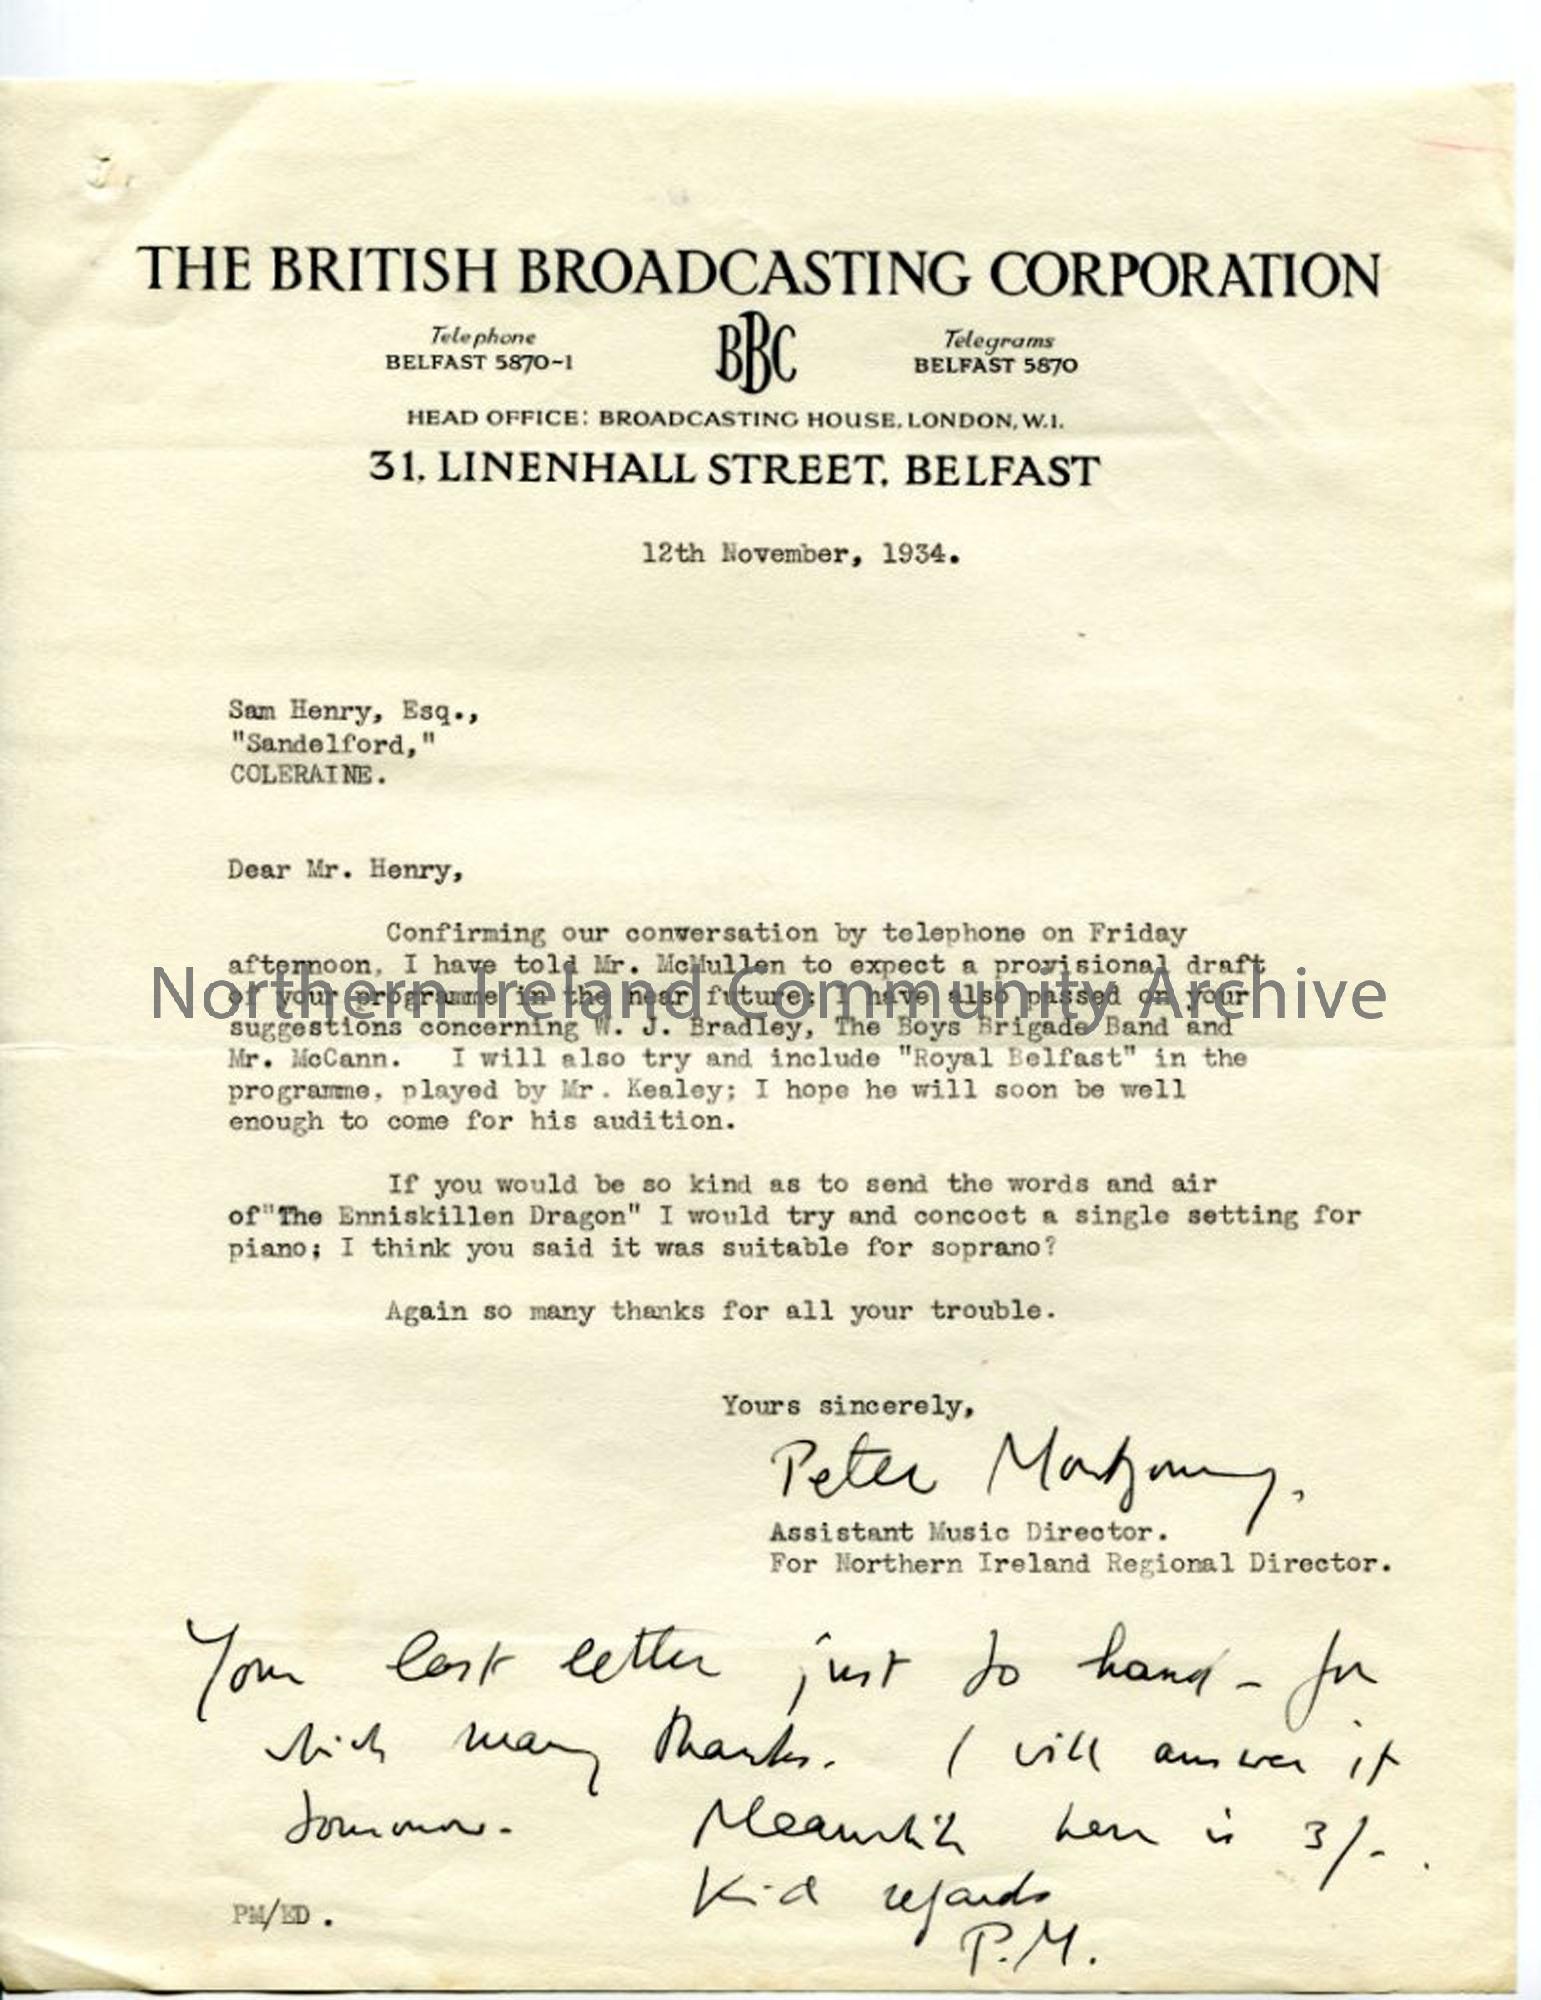 Letter from Peter Montgomery of the BBC, dated 12.11.1934